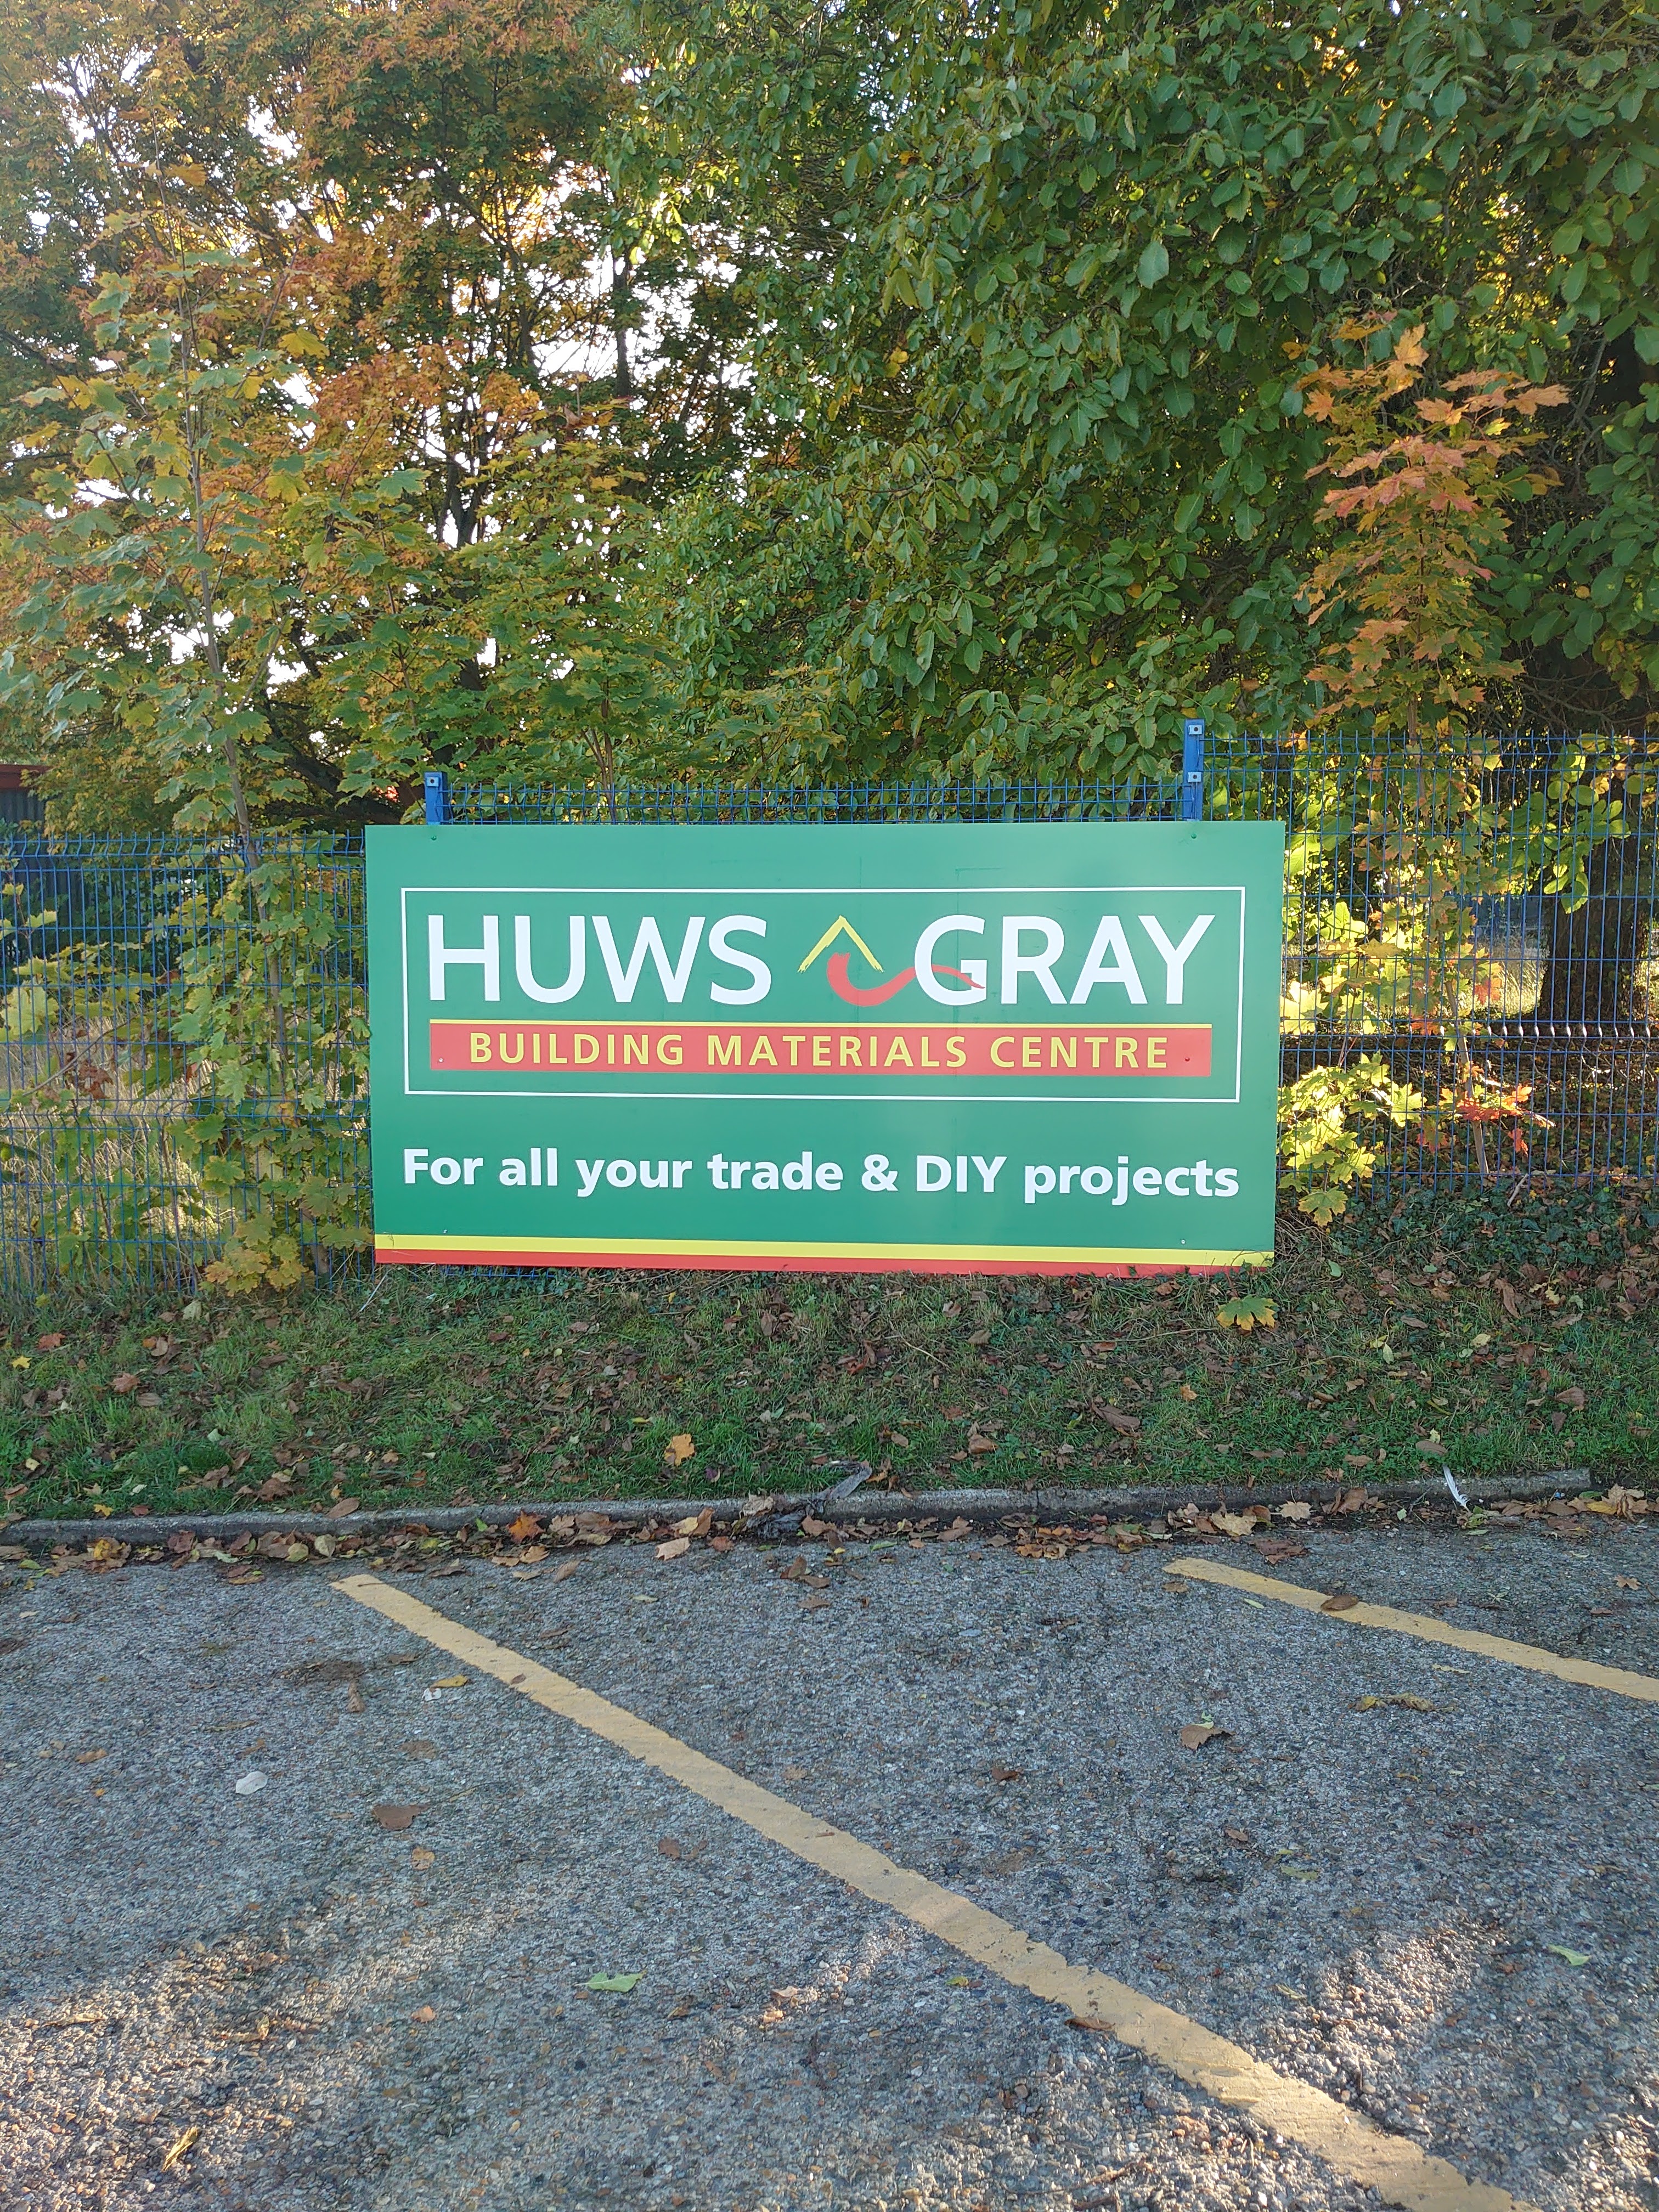 Images Huws Gray Bury St Edmunds